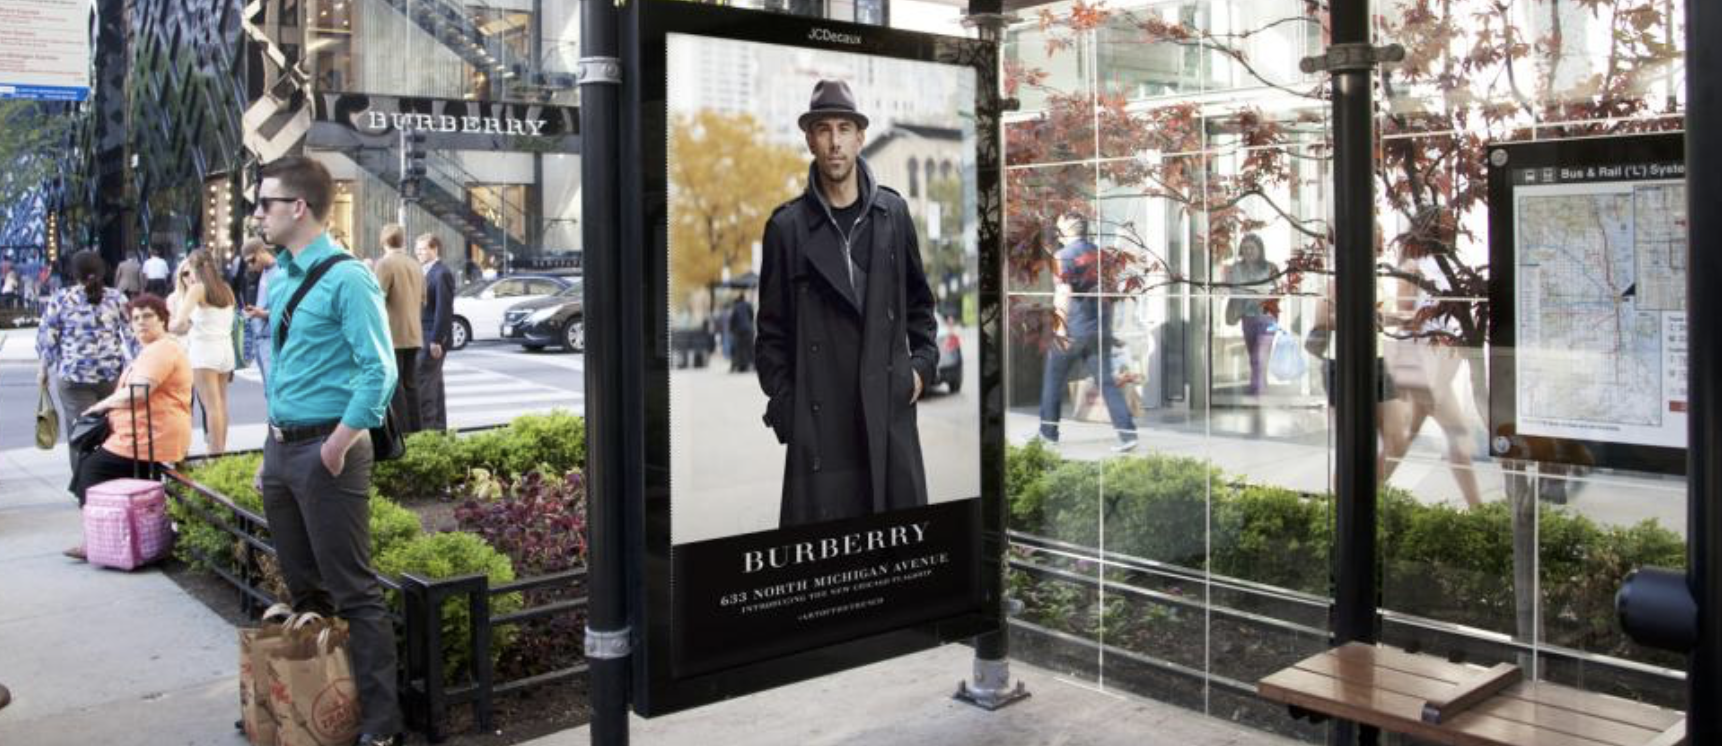 a bus shelter billboard advertising Burberry